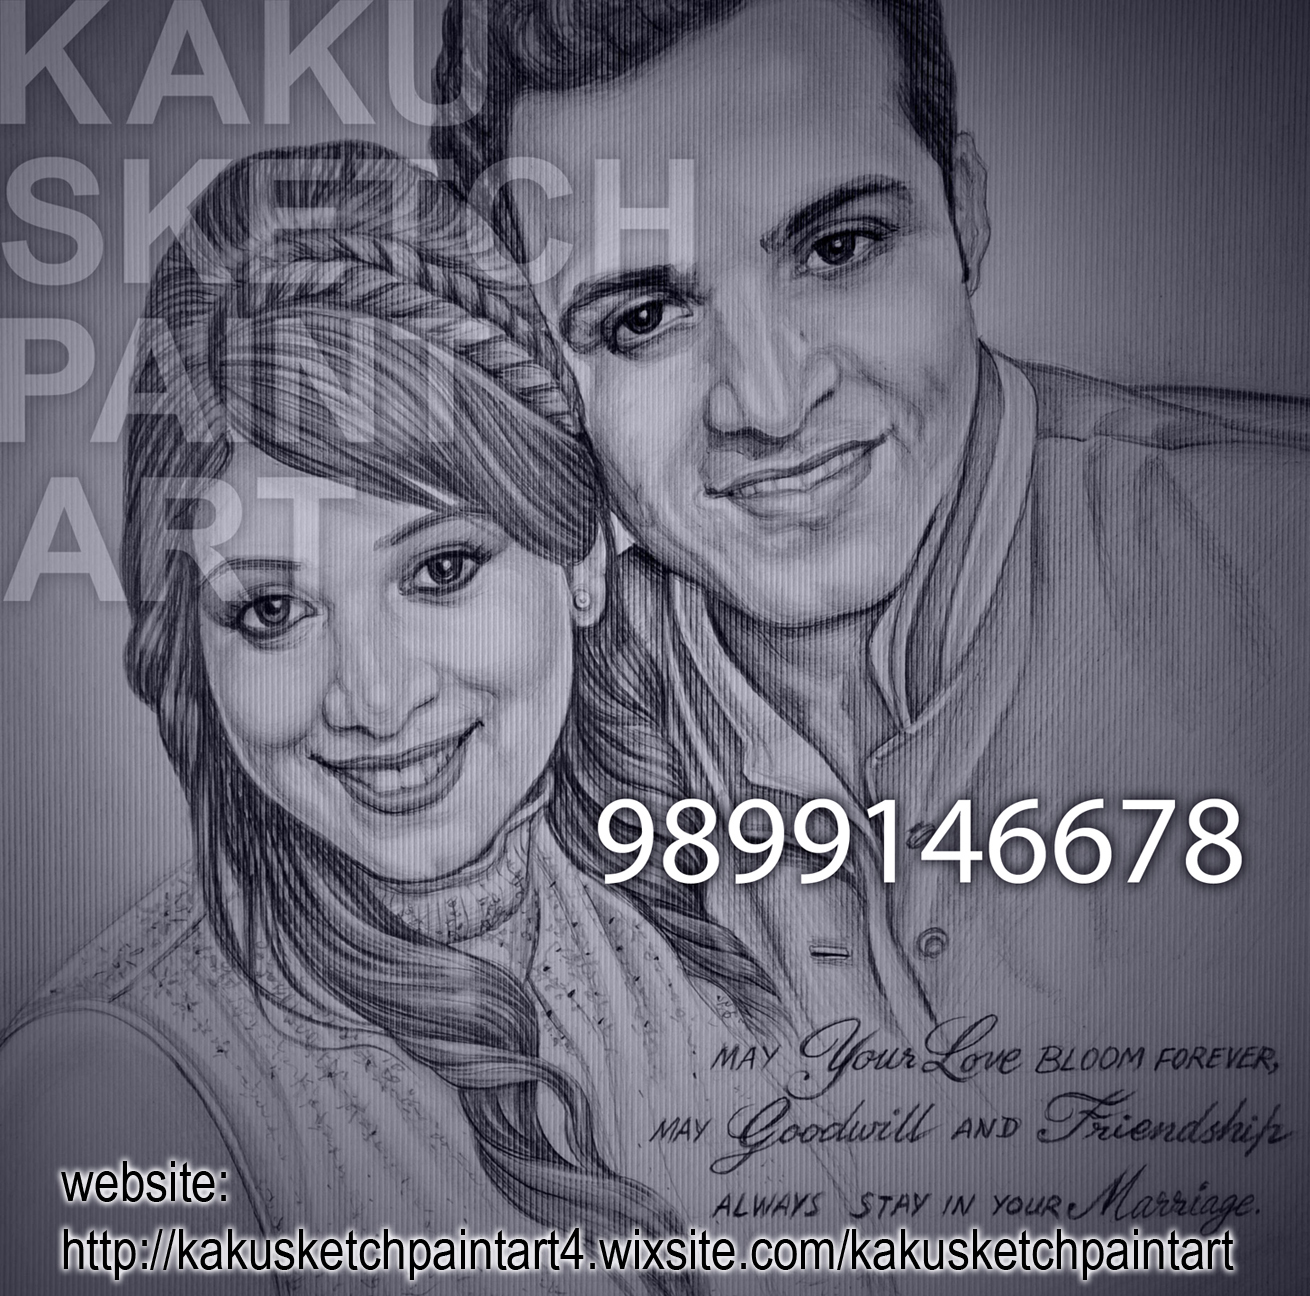 DELHI PENCIL SKETCH FROM PHOTO ARTIST...9990748867, 9899146678,ServicesEverything ElseCentral DelhiConnaught Place